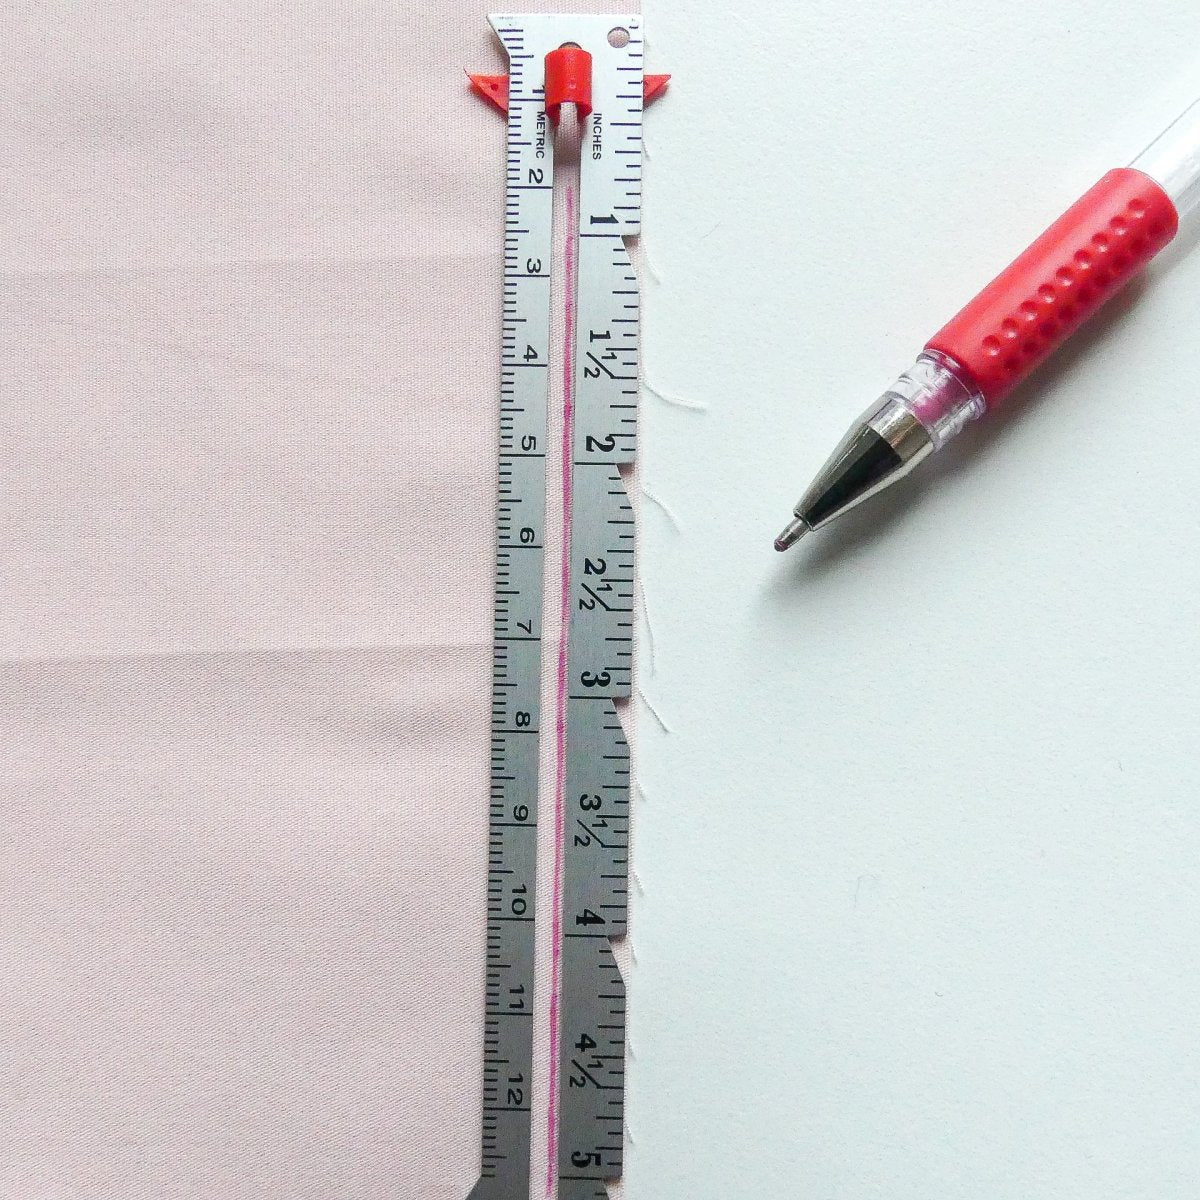 Marking hems on fabric with the measuring gauge and a heat erasable marking pen